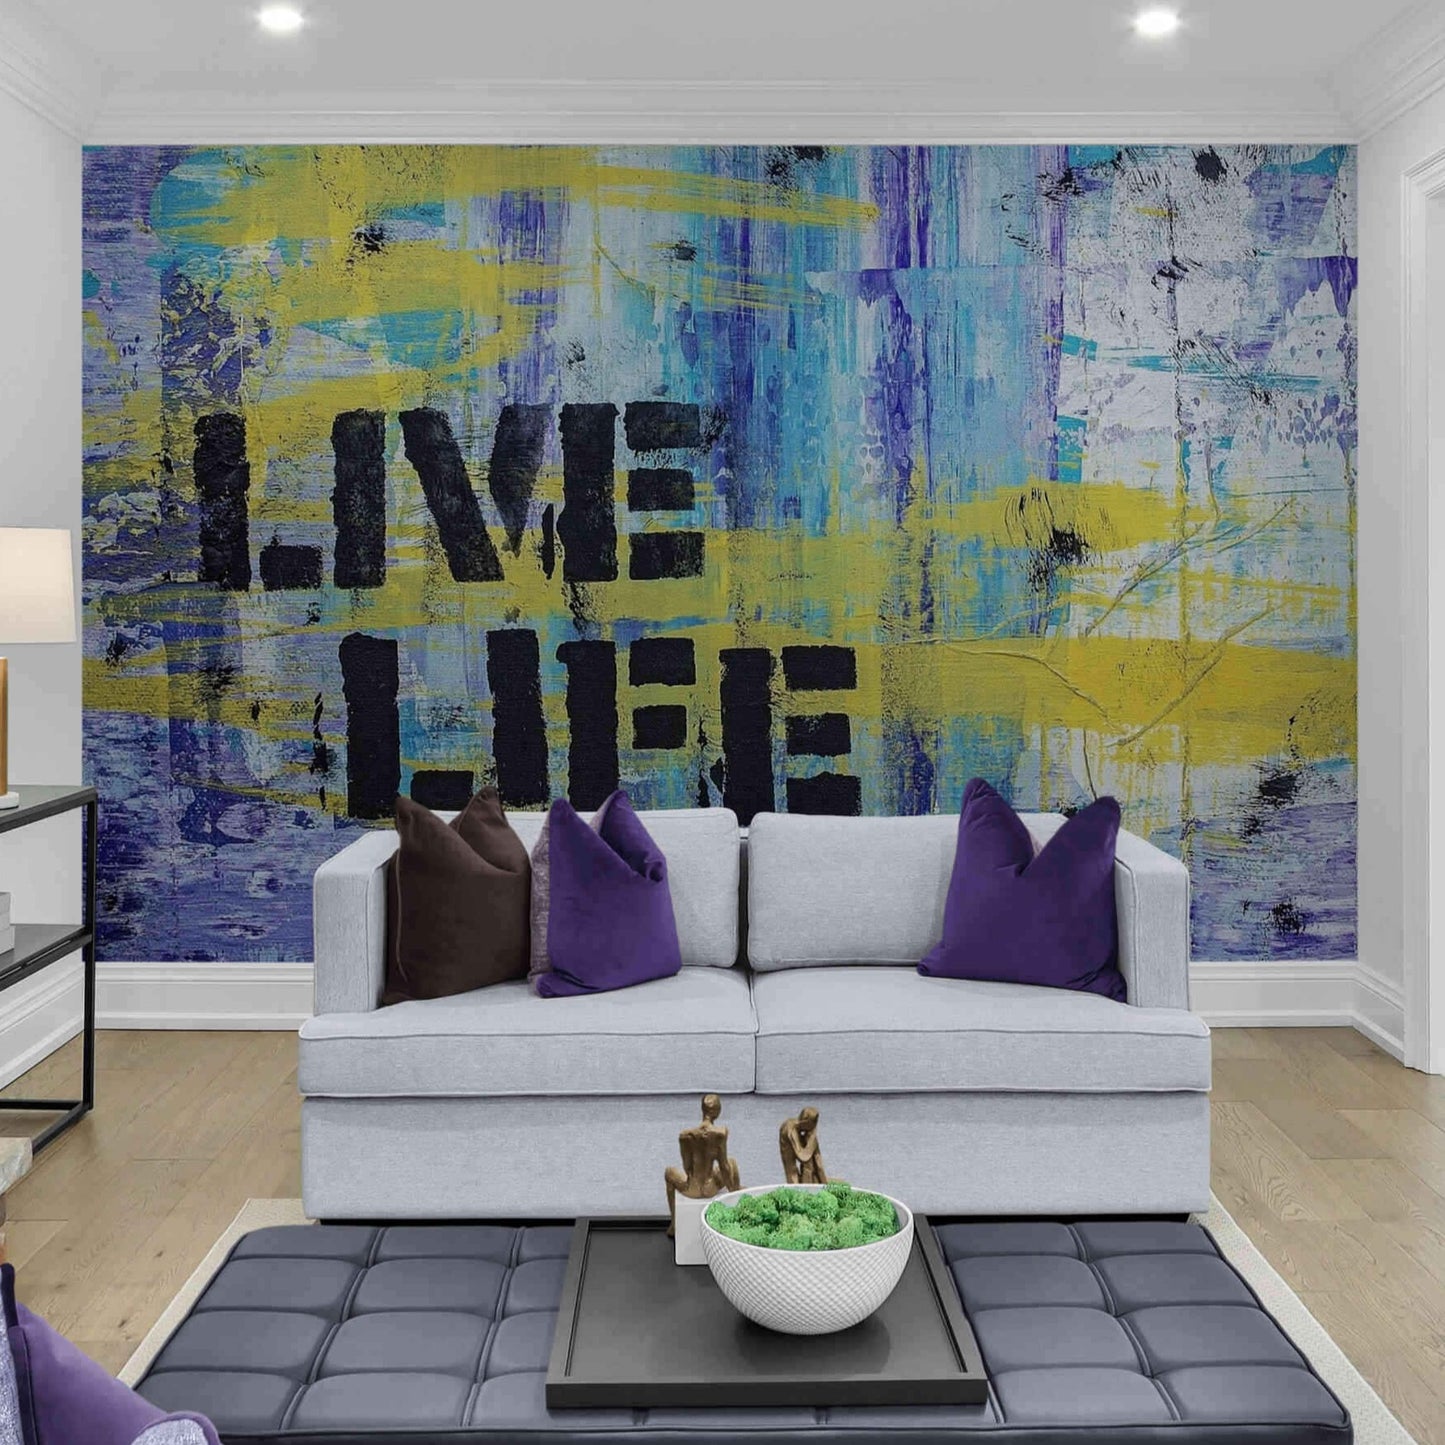 Vibrant 'Live' inscription on a contrasting blue and yellow graffiti wall mural.